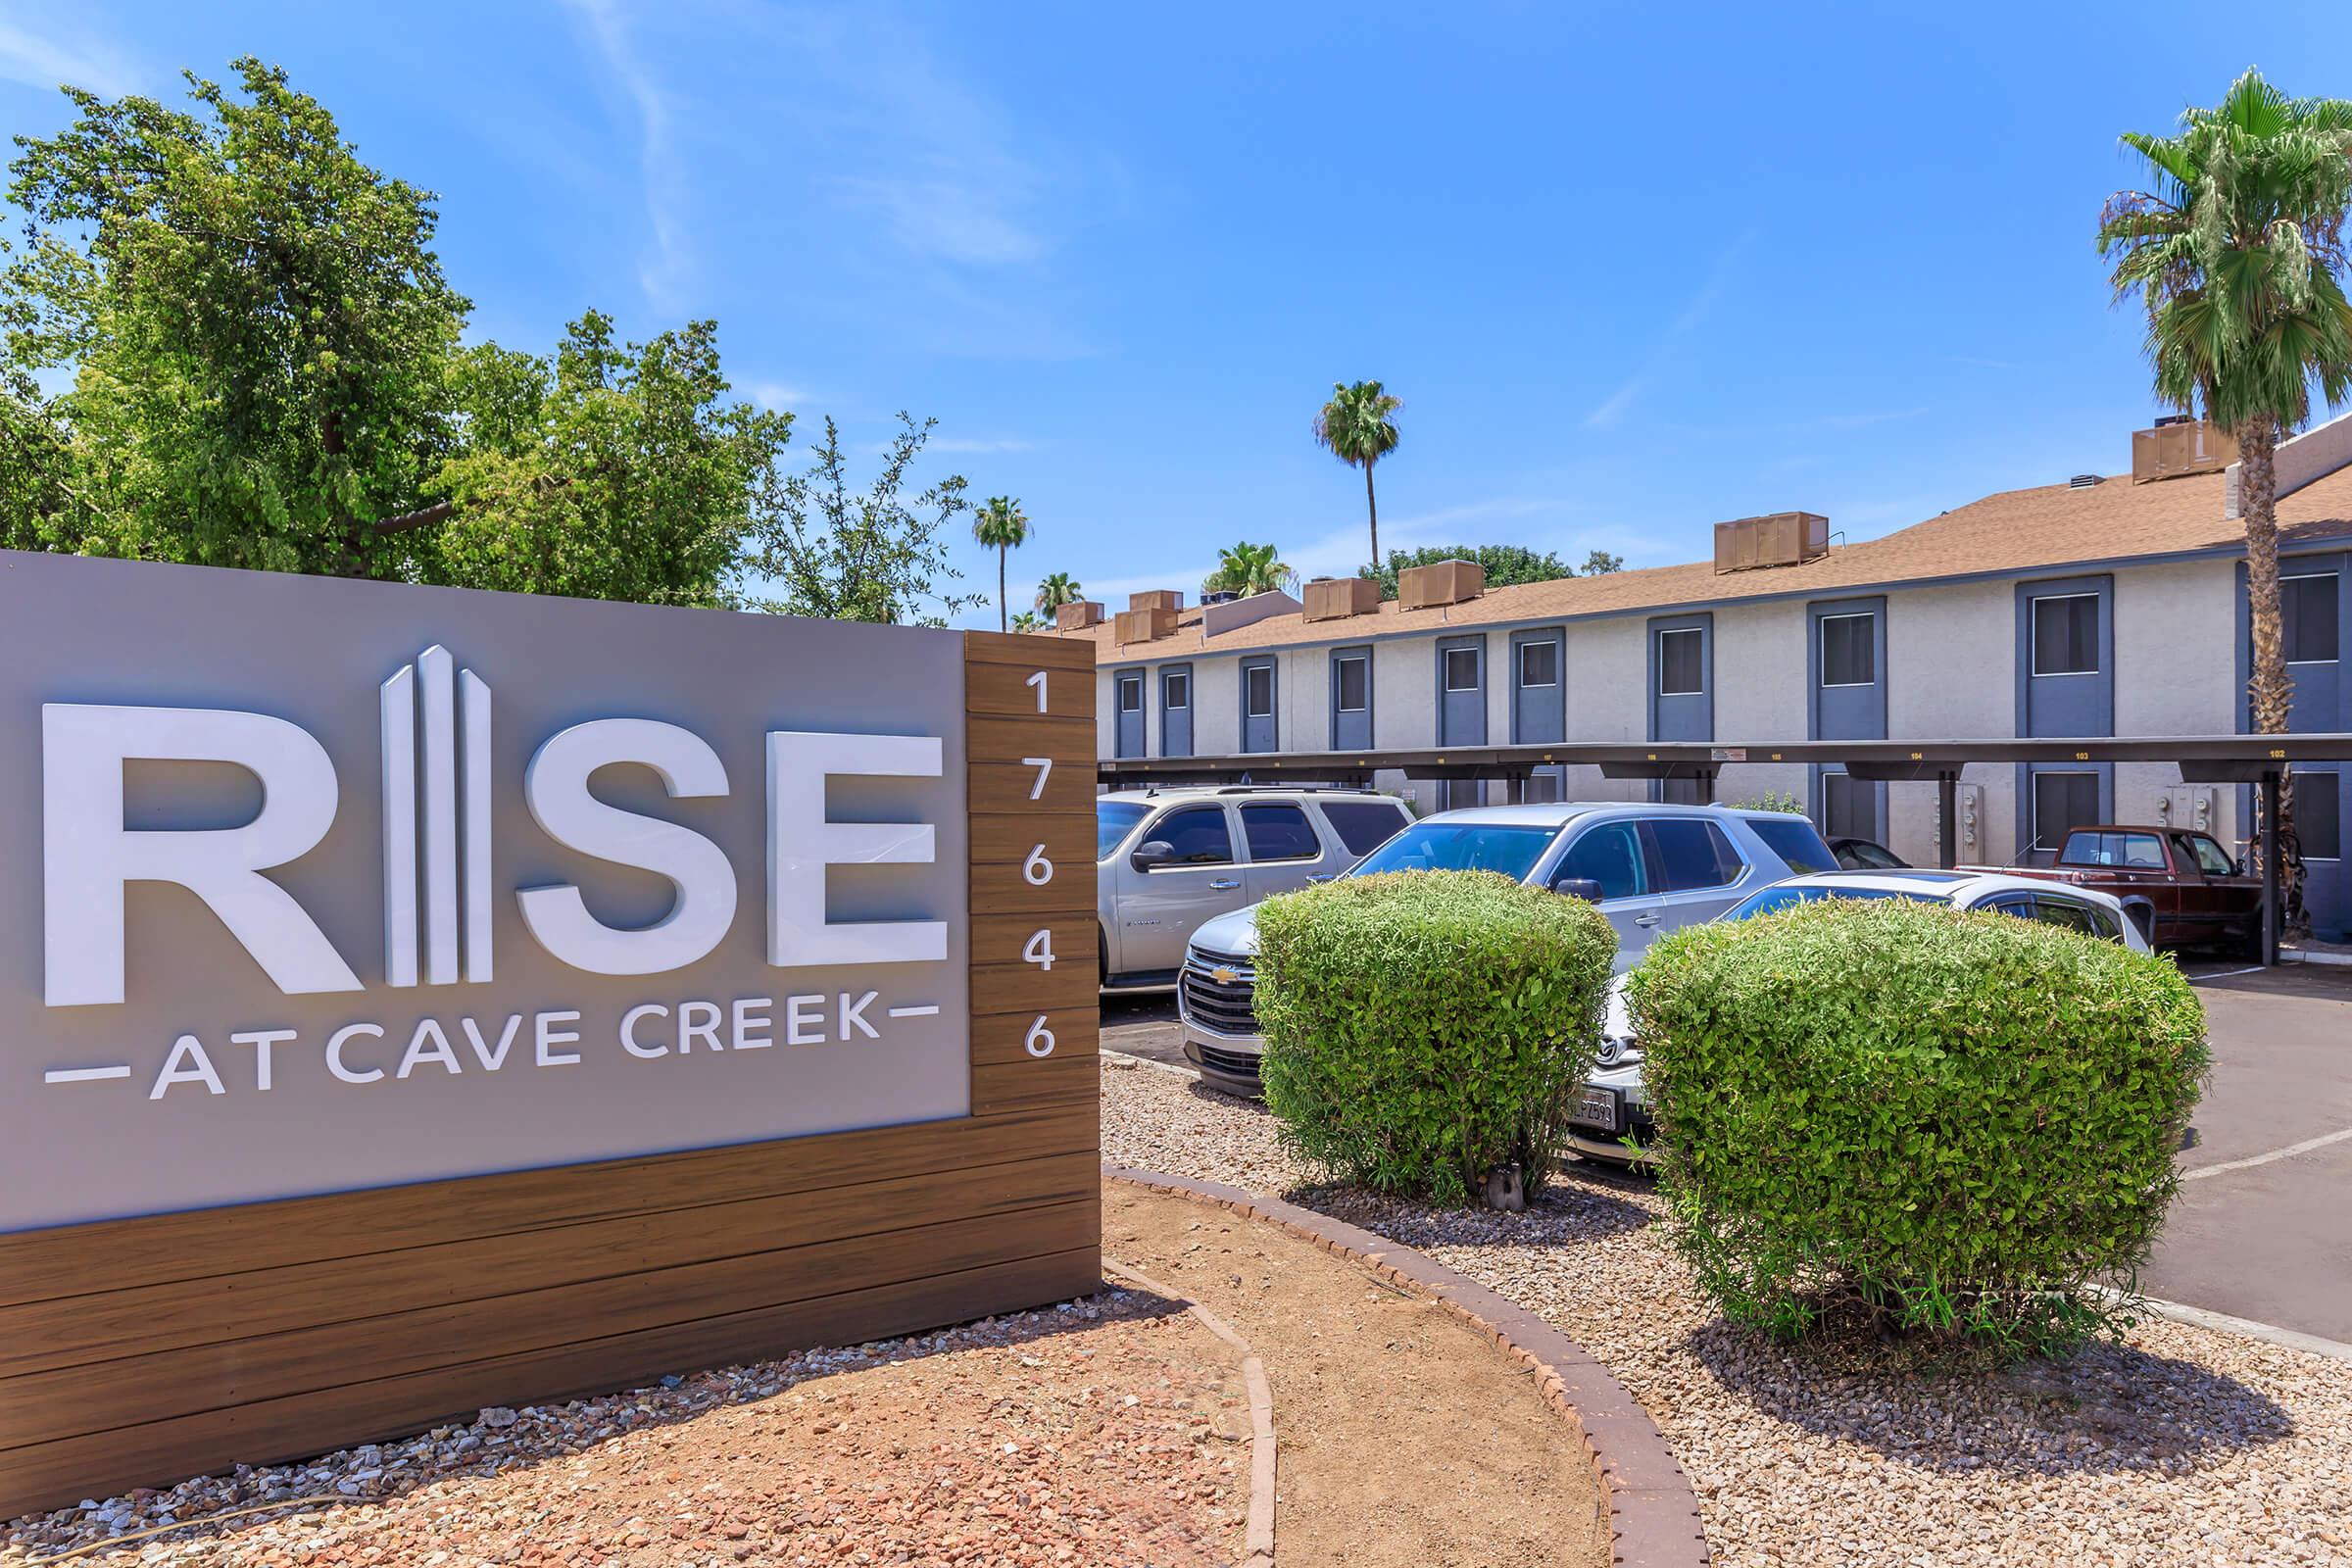 Rise at Cave Creek front signage in front of large apartment complex and parking lot